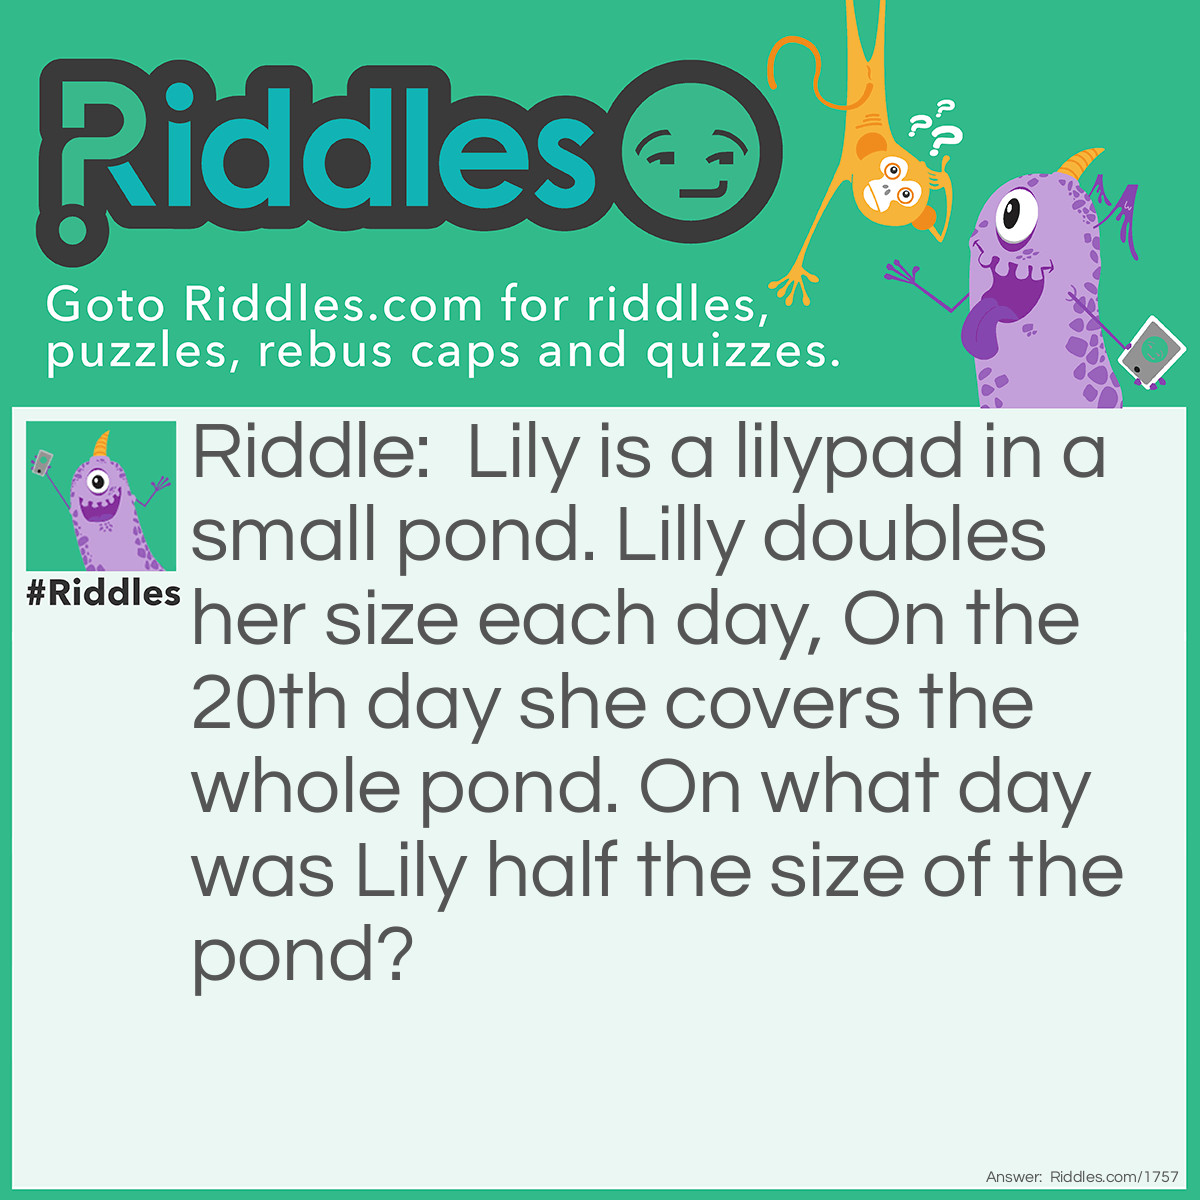 Riddle: Lily is a lilypad in a small pond. Lilly doubles her size each day, On the 20th day she covers the whole pond. On <a href="/6185">what day</a> was Lily half the size of the pond? Answer: Day 19, it's not 10 because on day 20 she doubled from day 19, so 19 must be half the size of the pond.